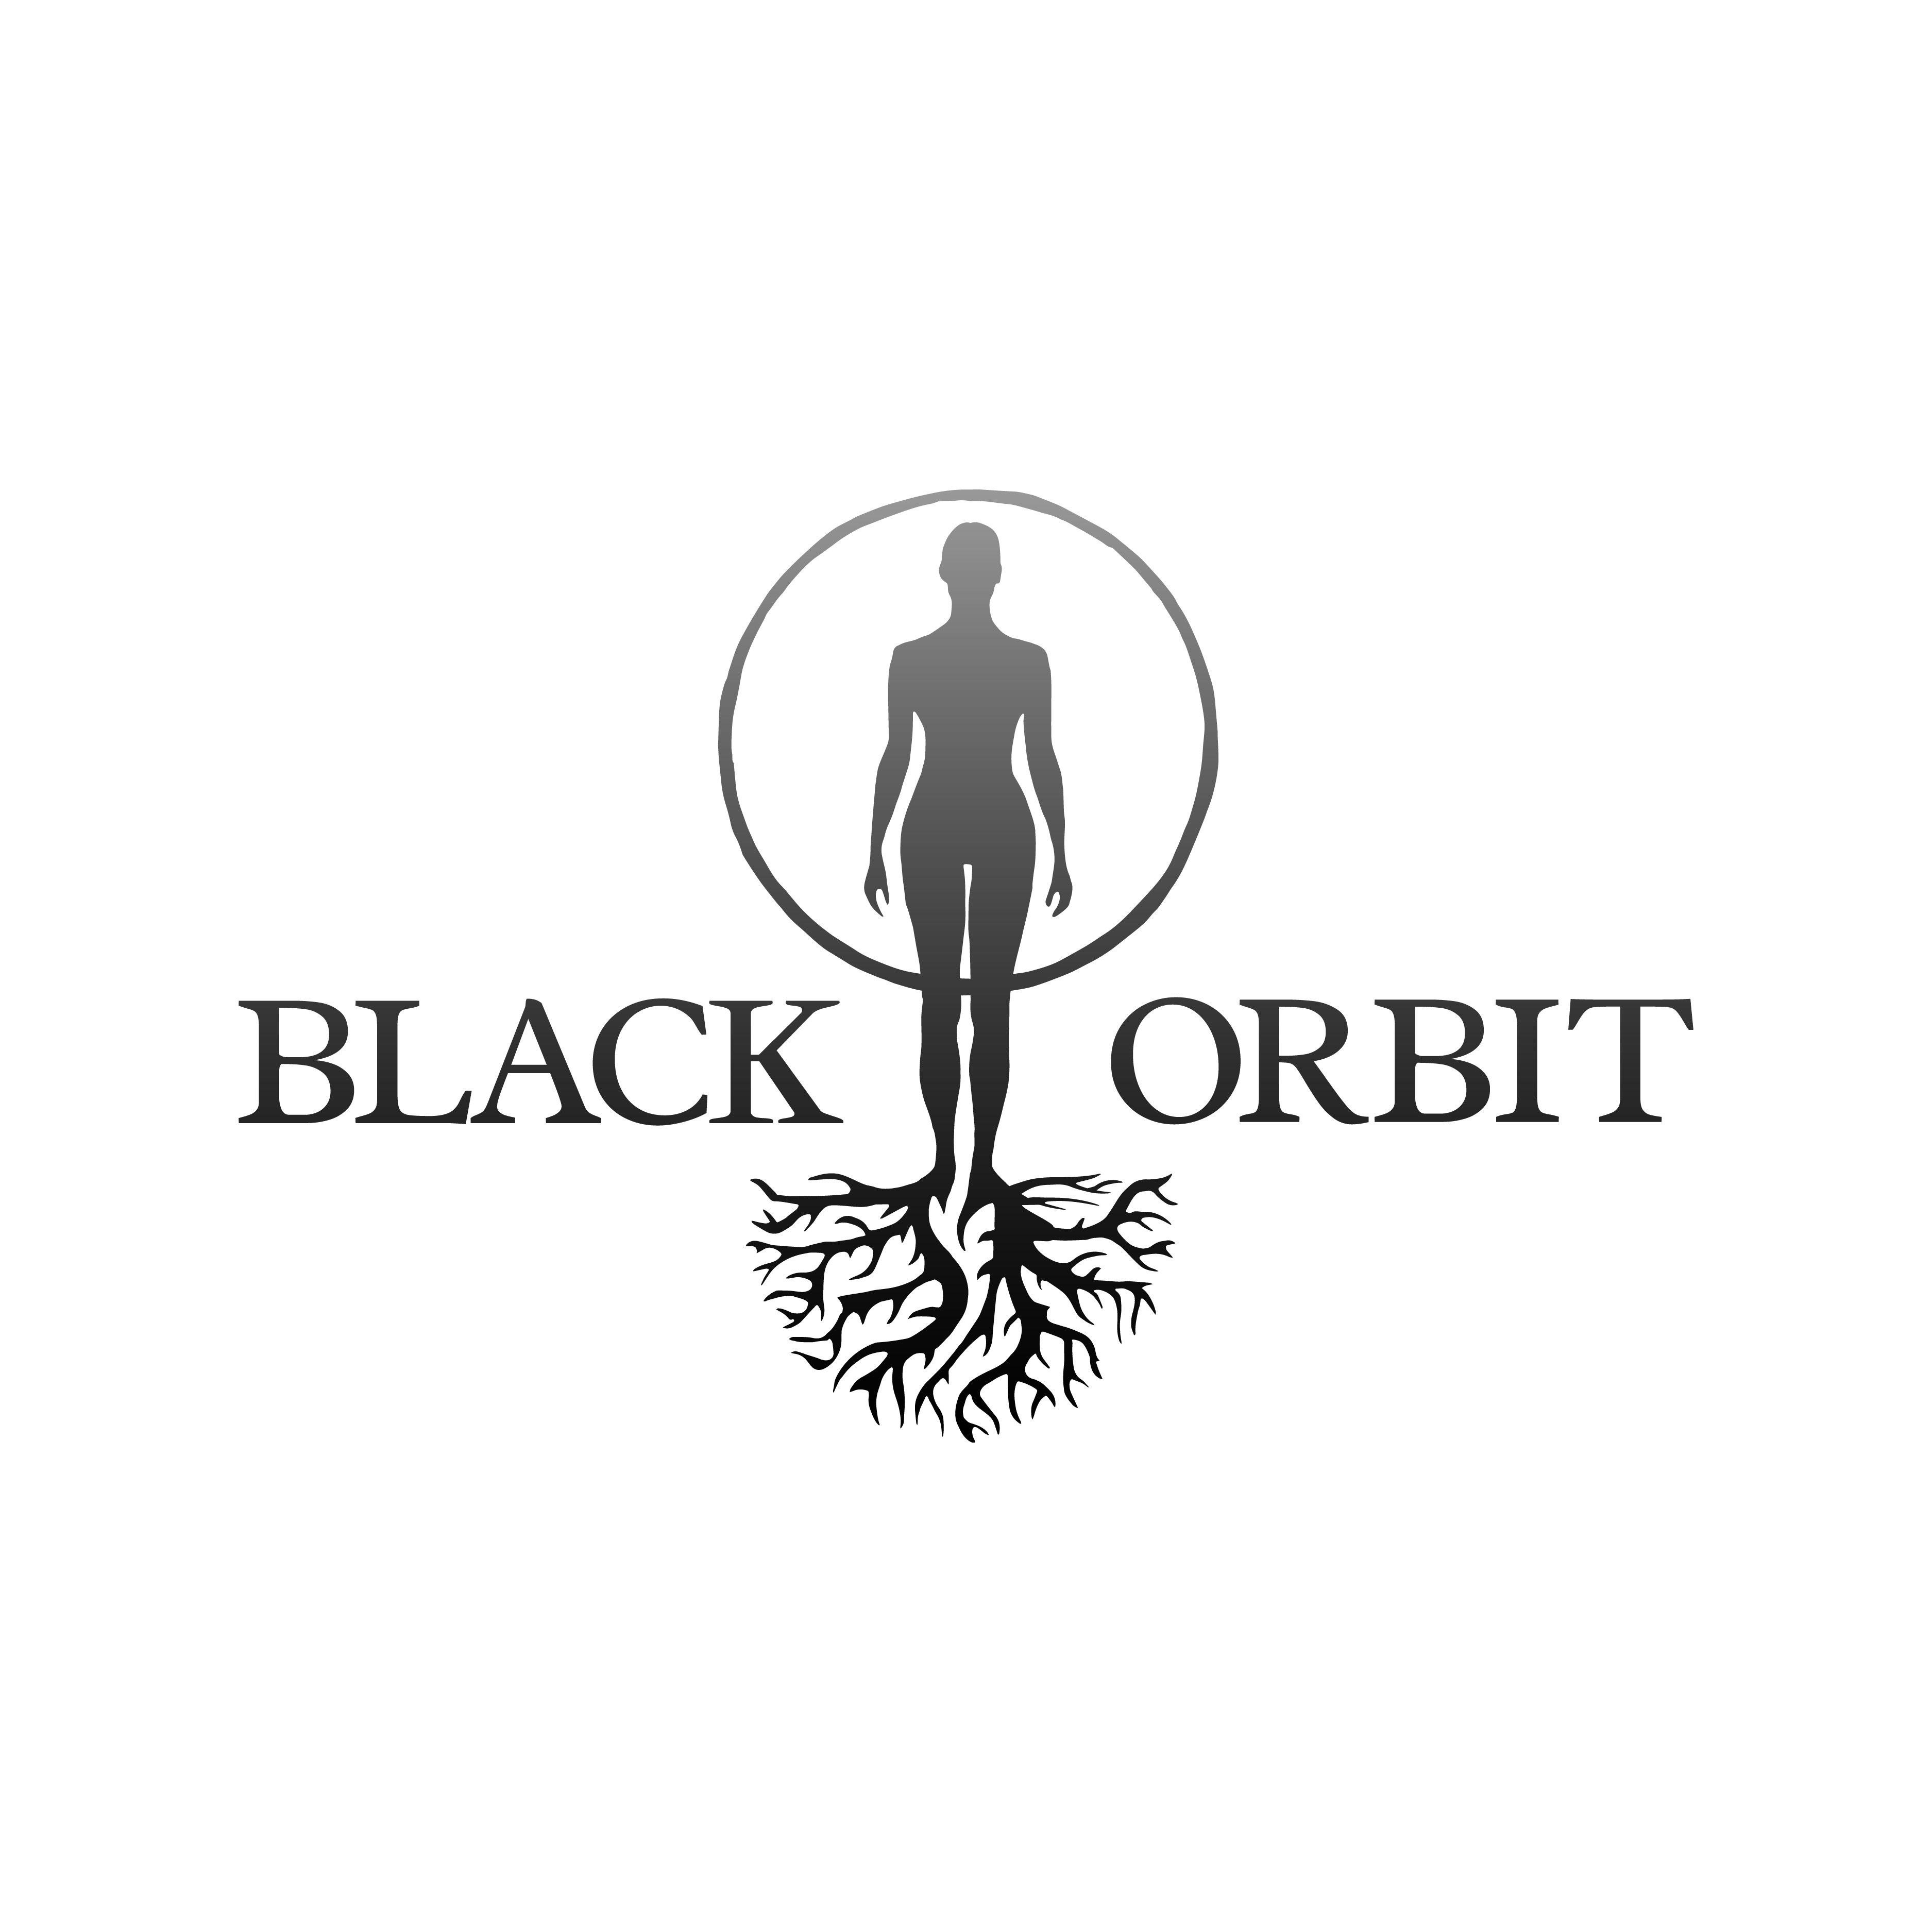 Black Orbit Recordings logo design by logo designer liamjacksongraphics for your inspiration and for the worlds largest logo competition